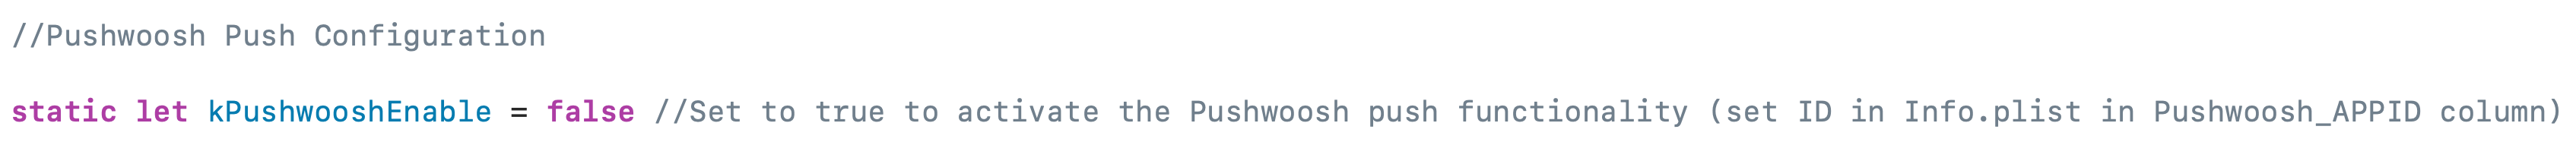 Send a new push notification to your app users with Pushwoosh